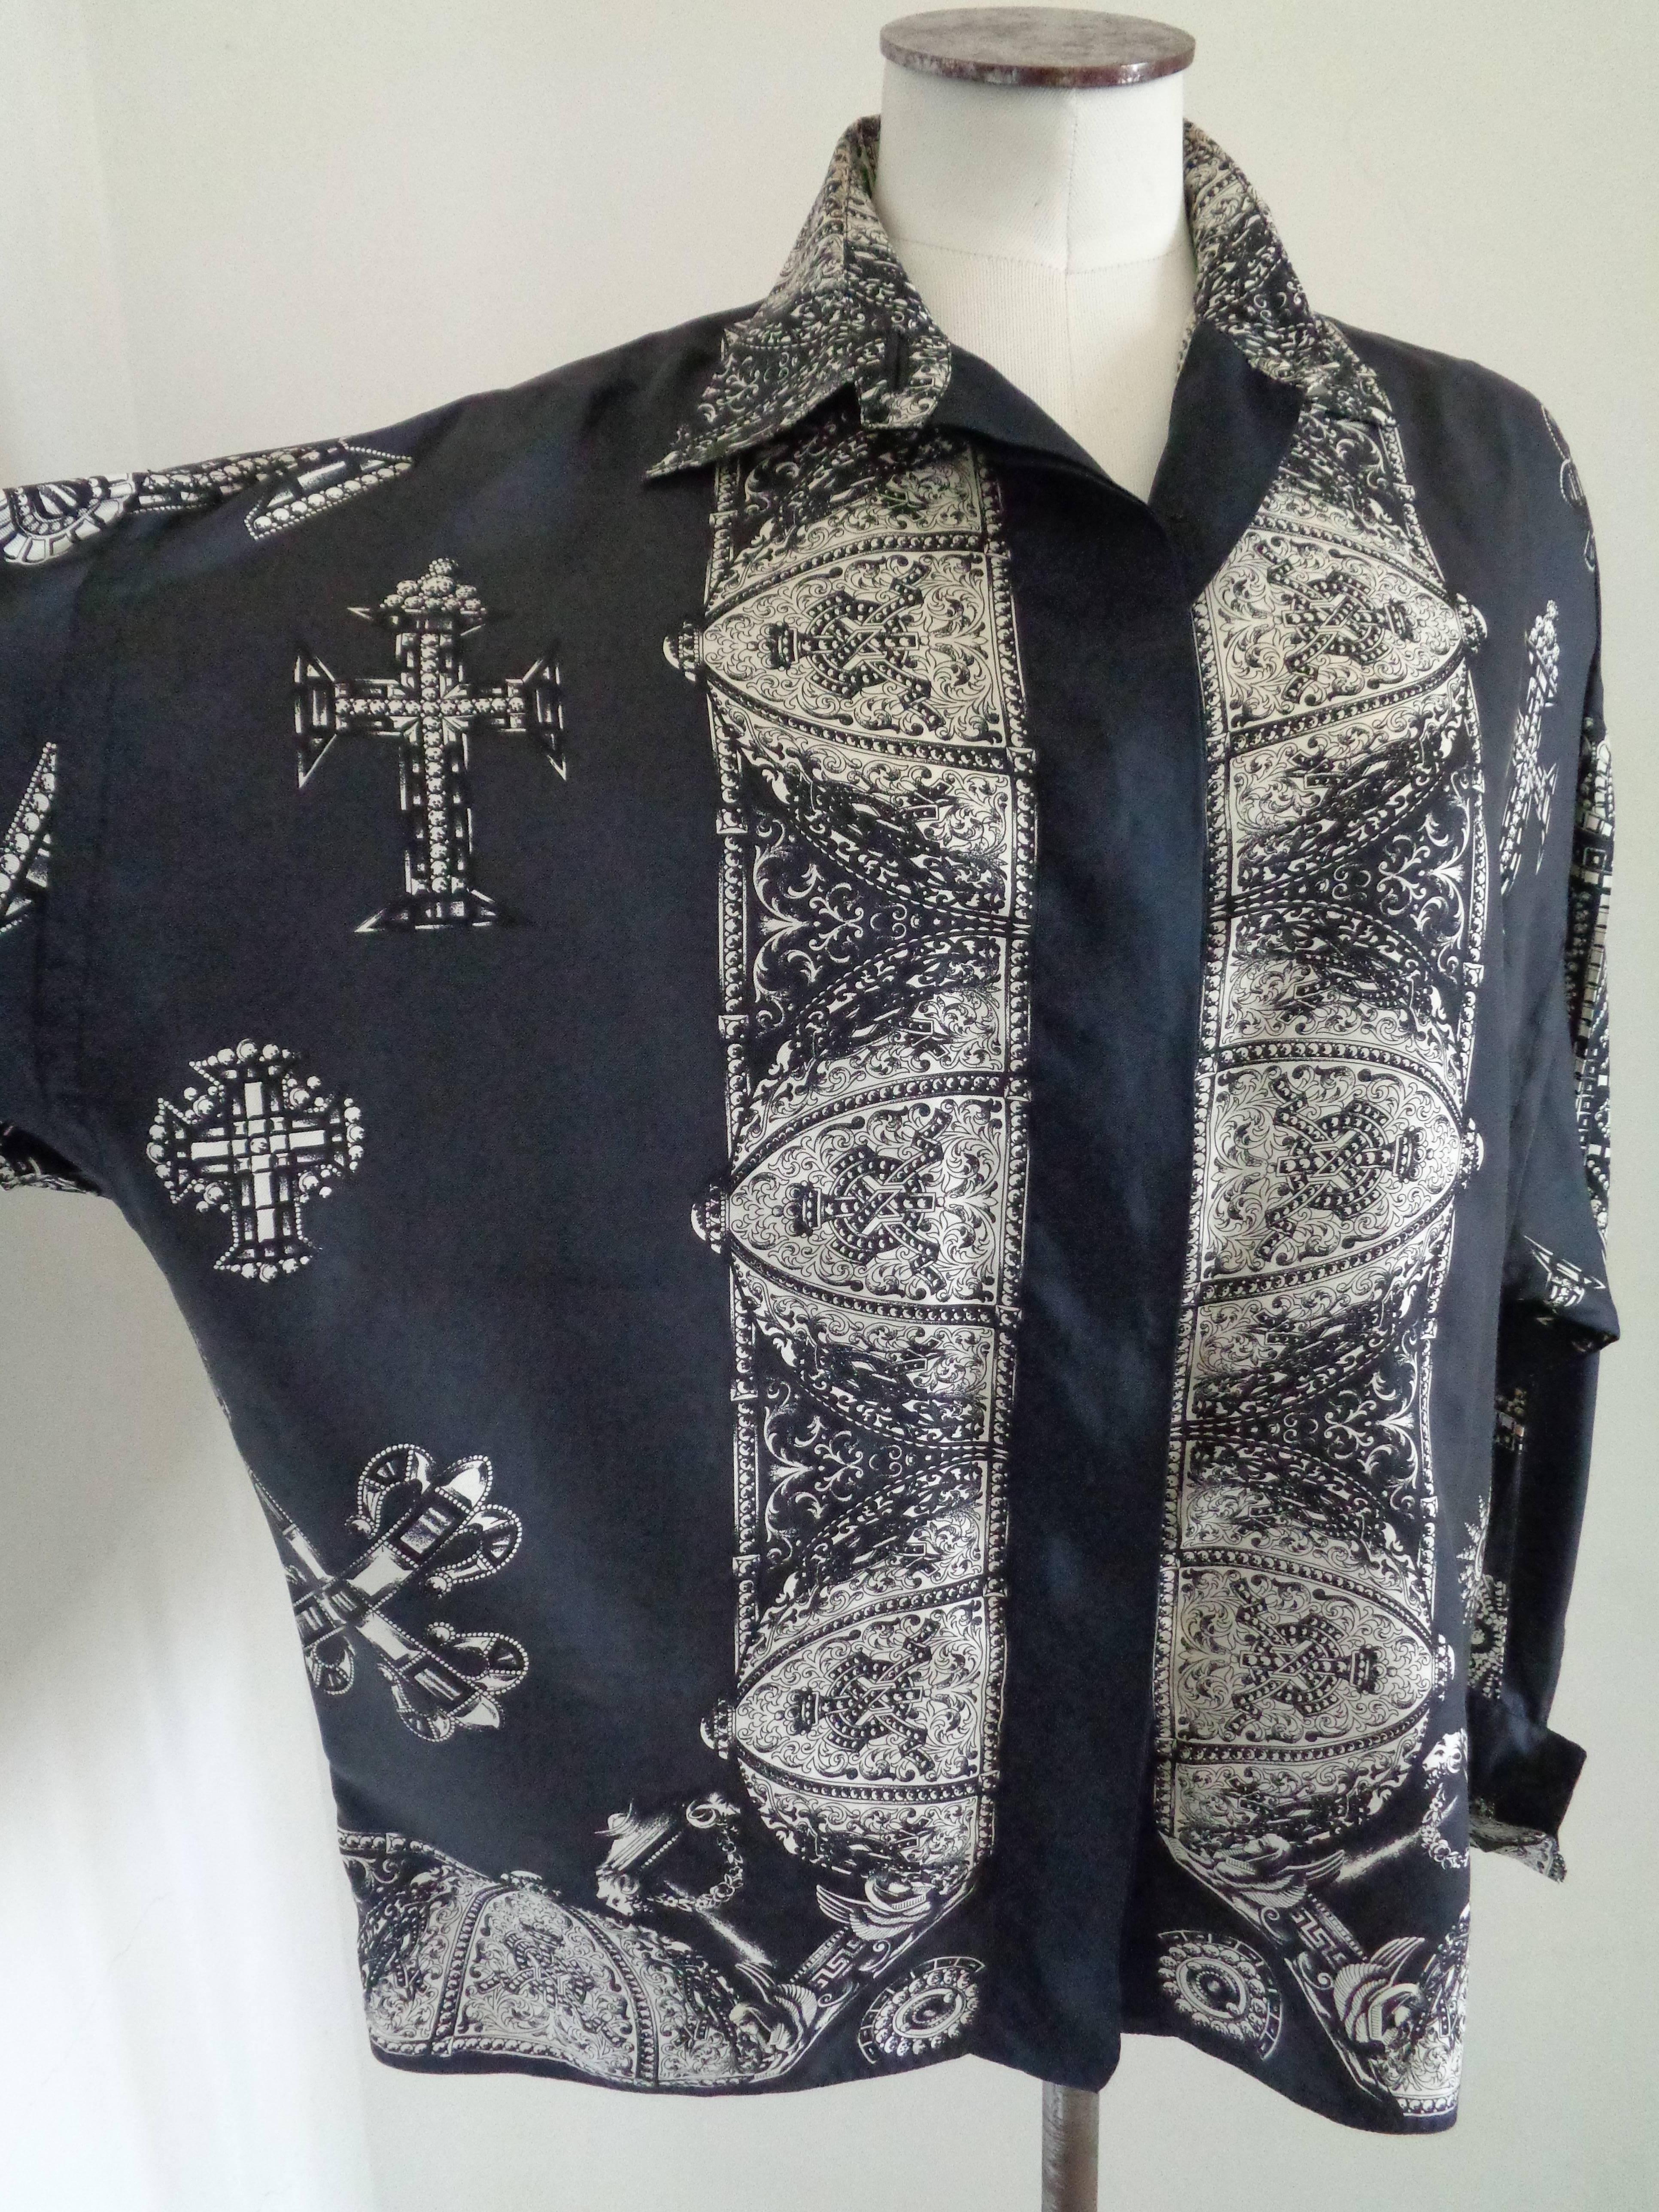 1980s Gianni Versace Black White Silk Shirt

Cross print all over

Totally made in italy in italian size range 44

Composition: Silk

Embellished with gold tone and black stone bottons.